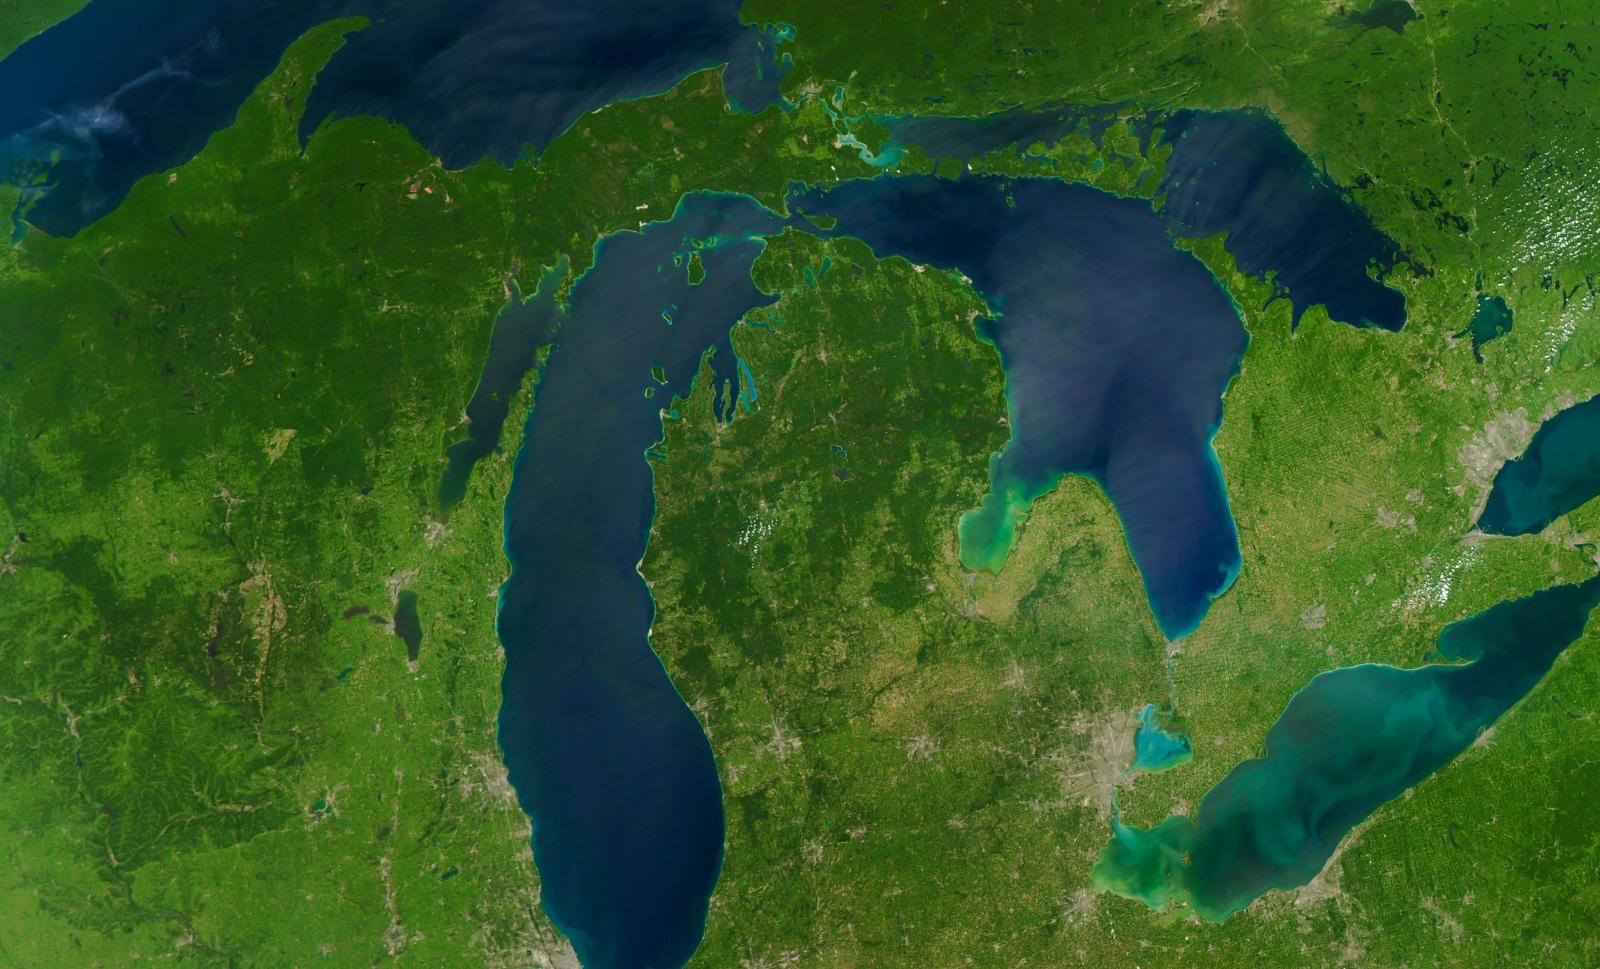 The state of Michigan as seen from space.